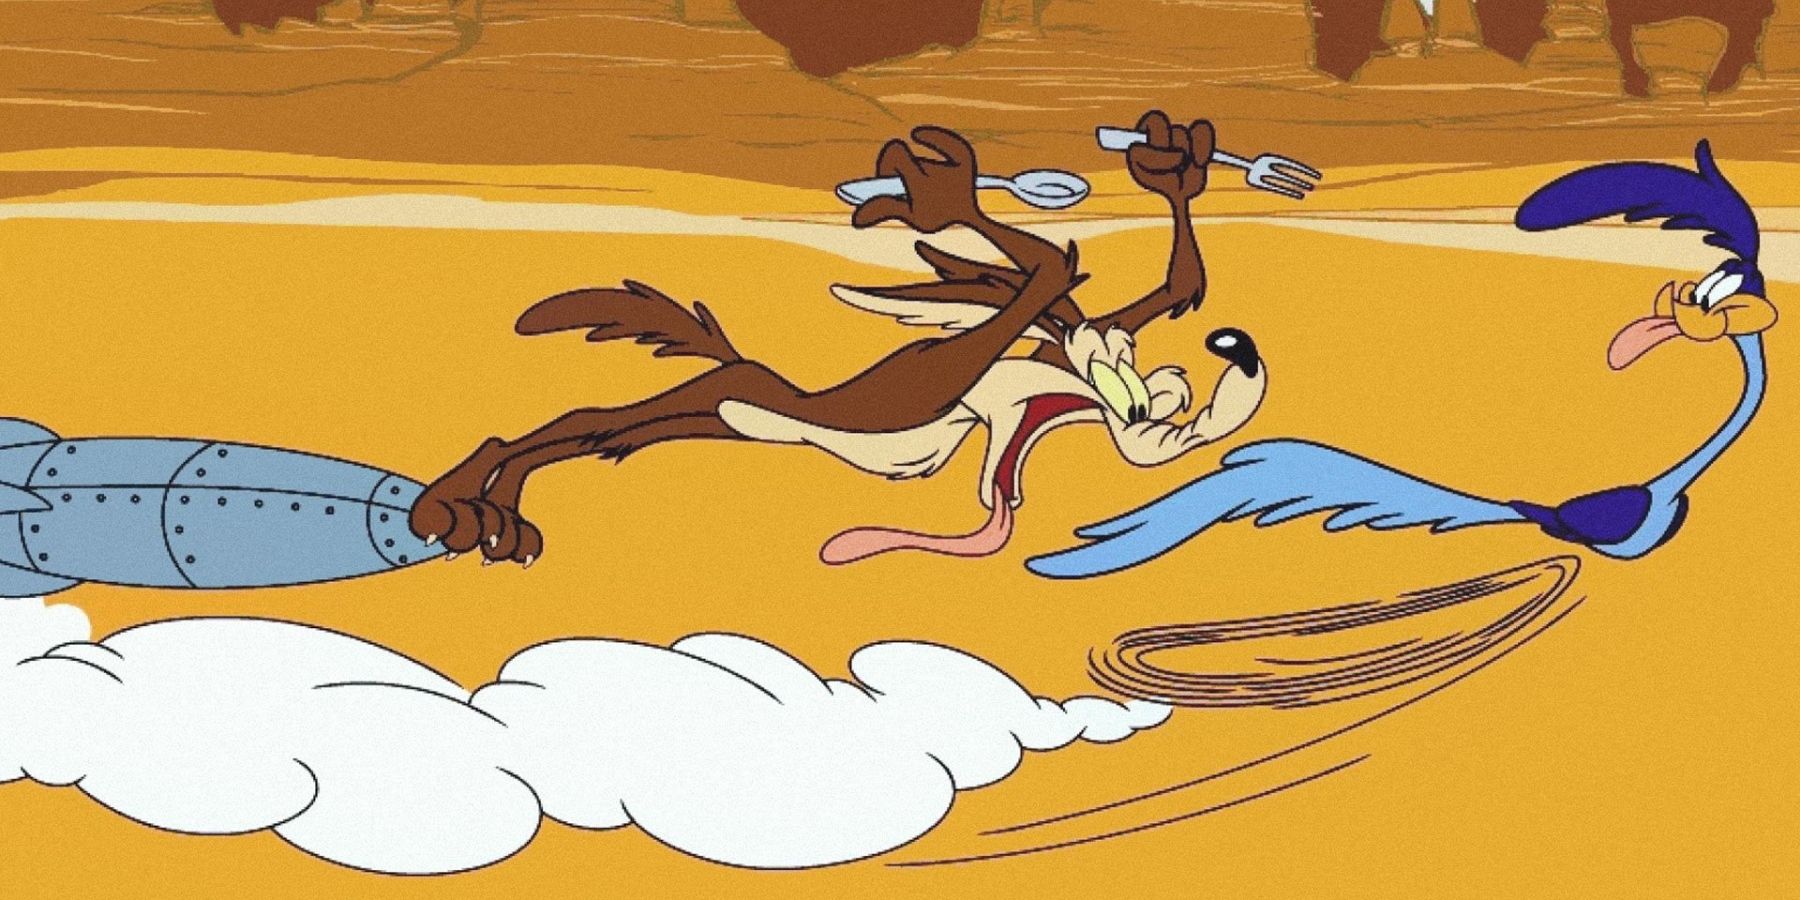 Wile E Coyote and Roadrunner from the Looney Tunes 